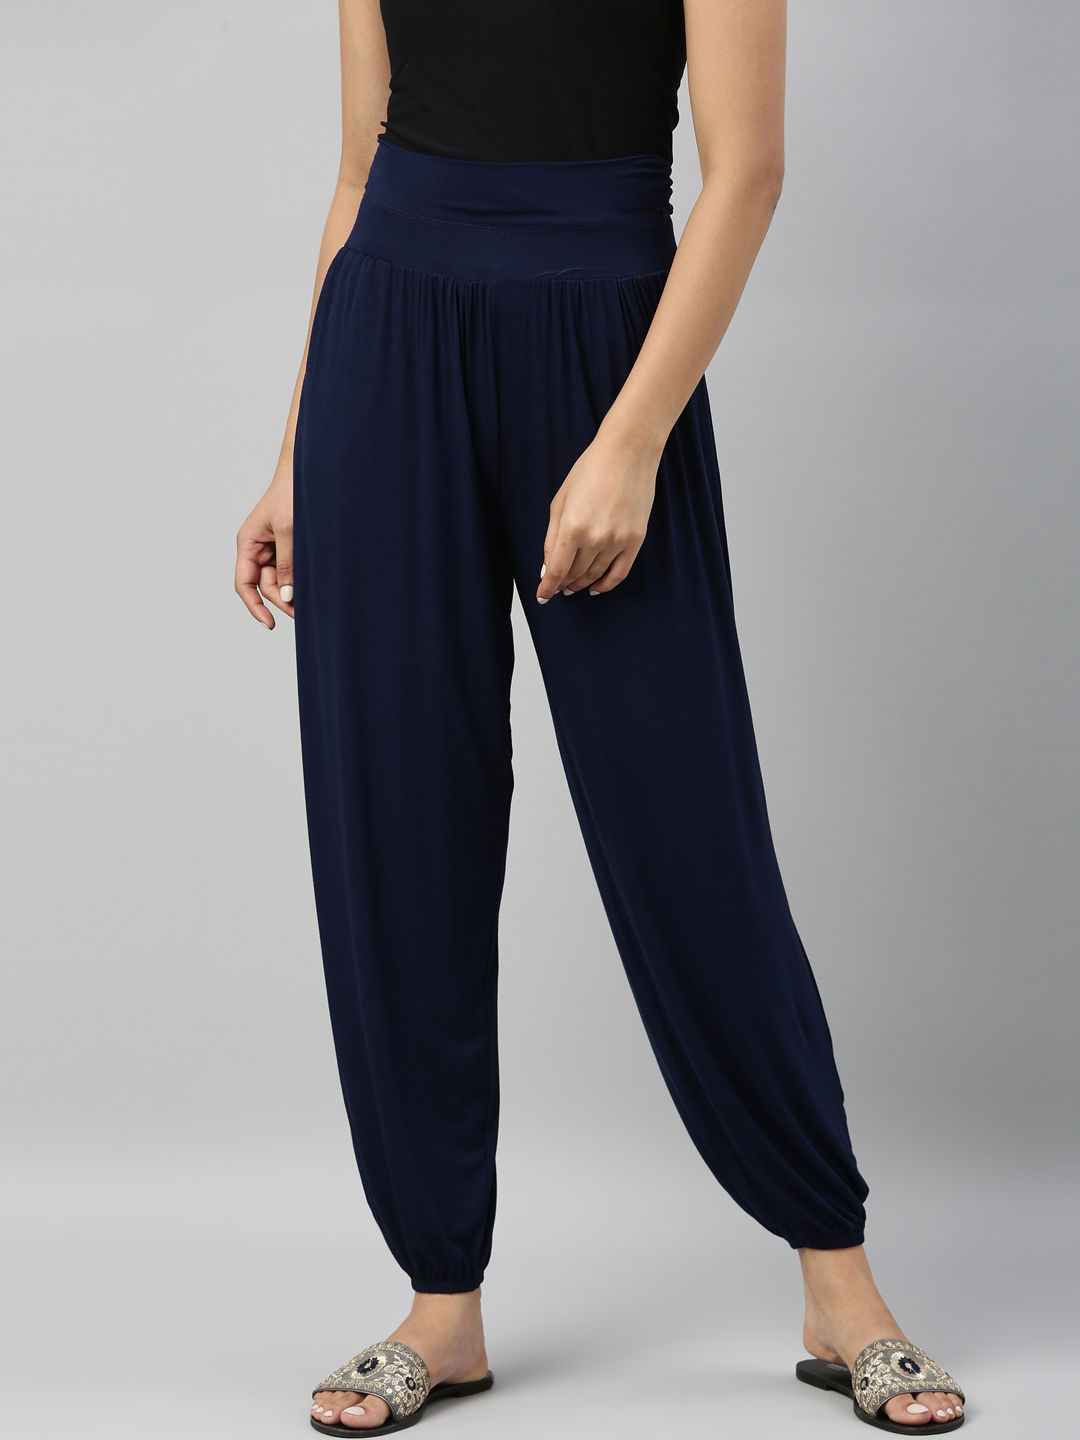 Buy Navy Blue Pants for Women by Ancestry Online | Ajio.com